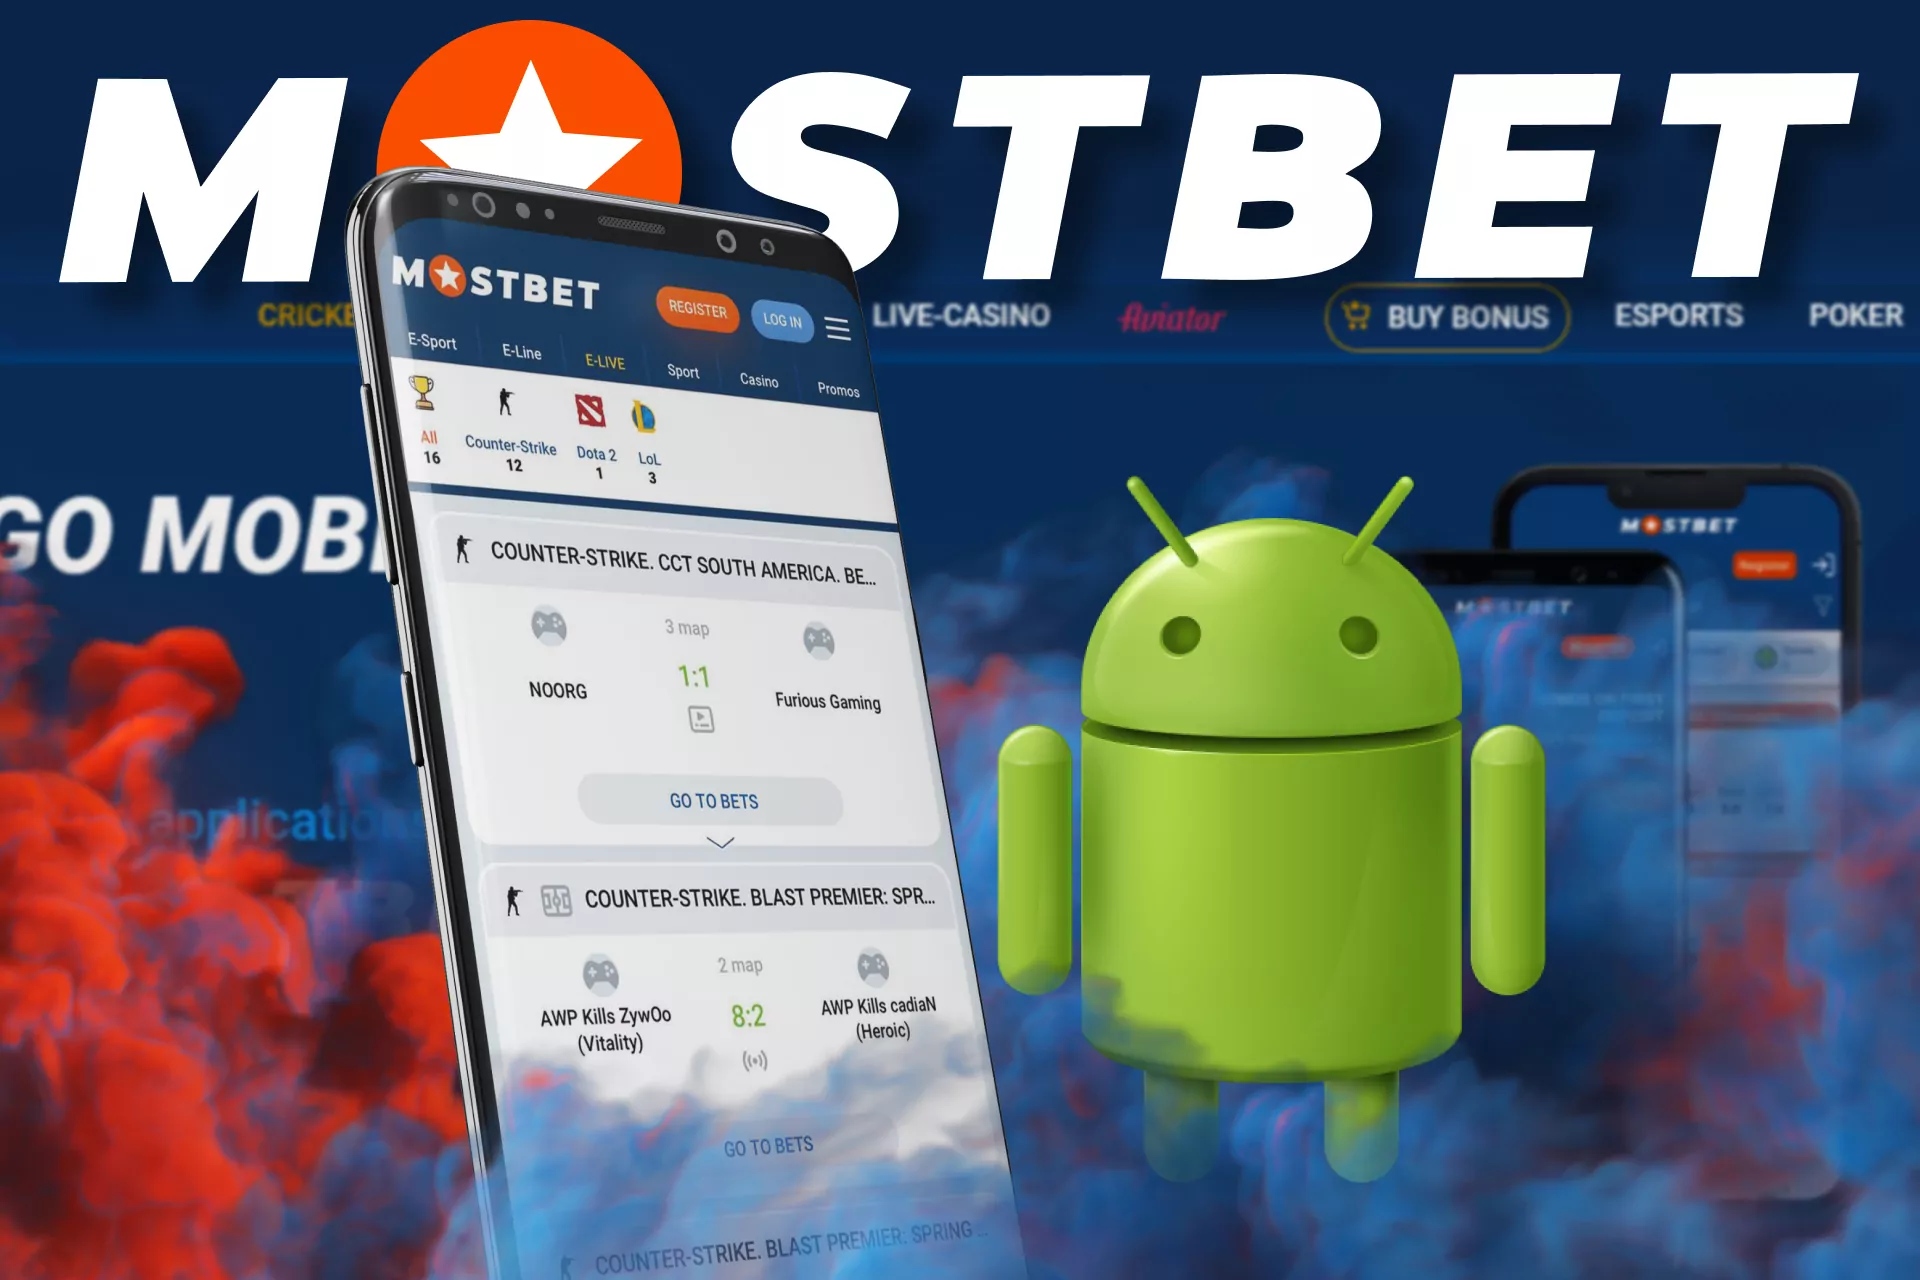 At Mostbet you can bet on esports directly on your Android device through the app.